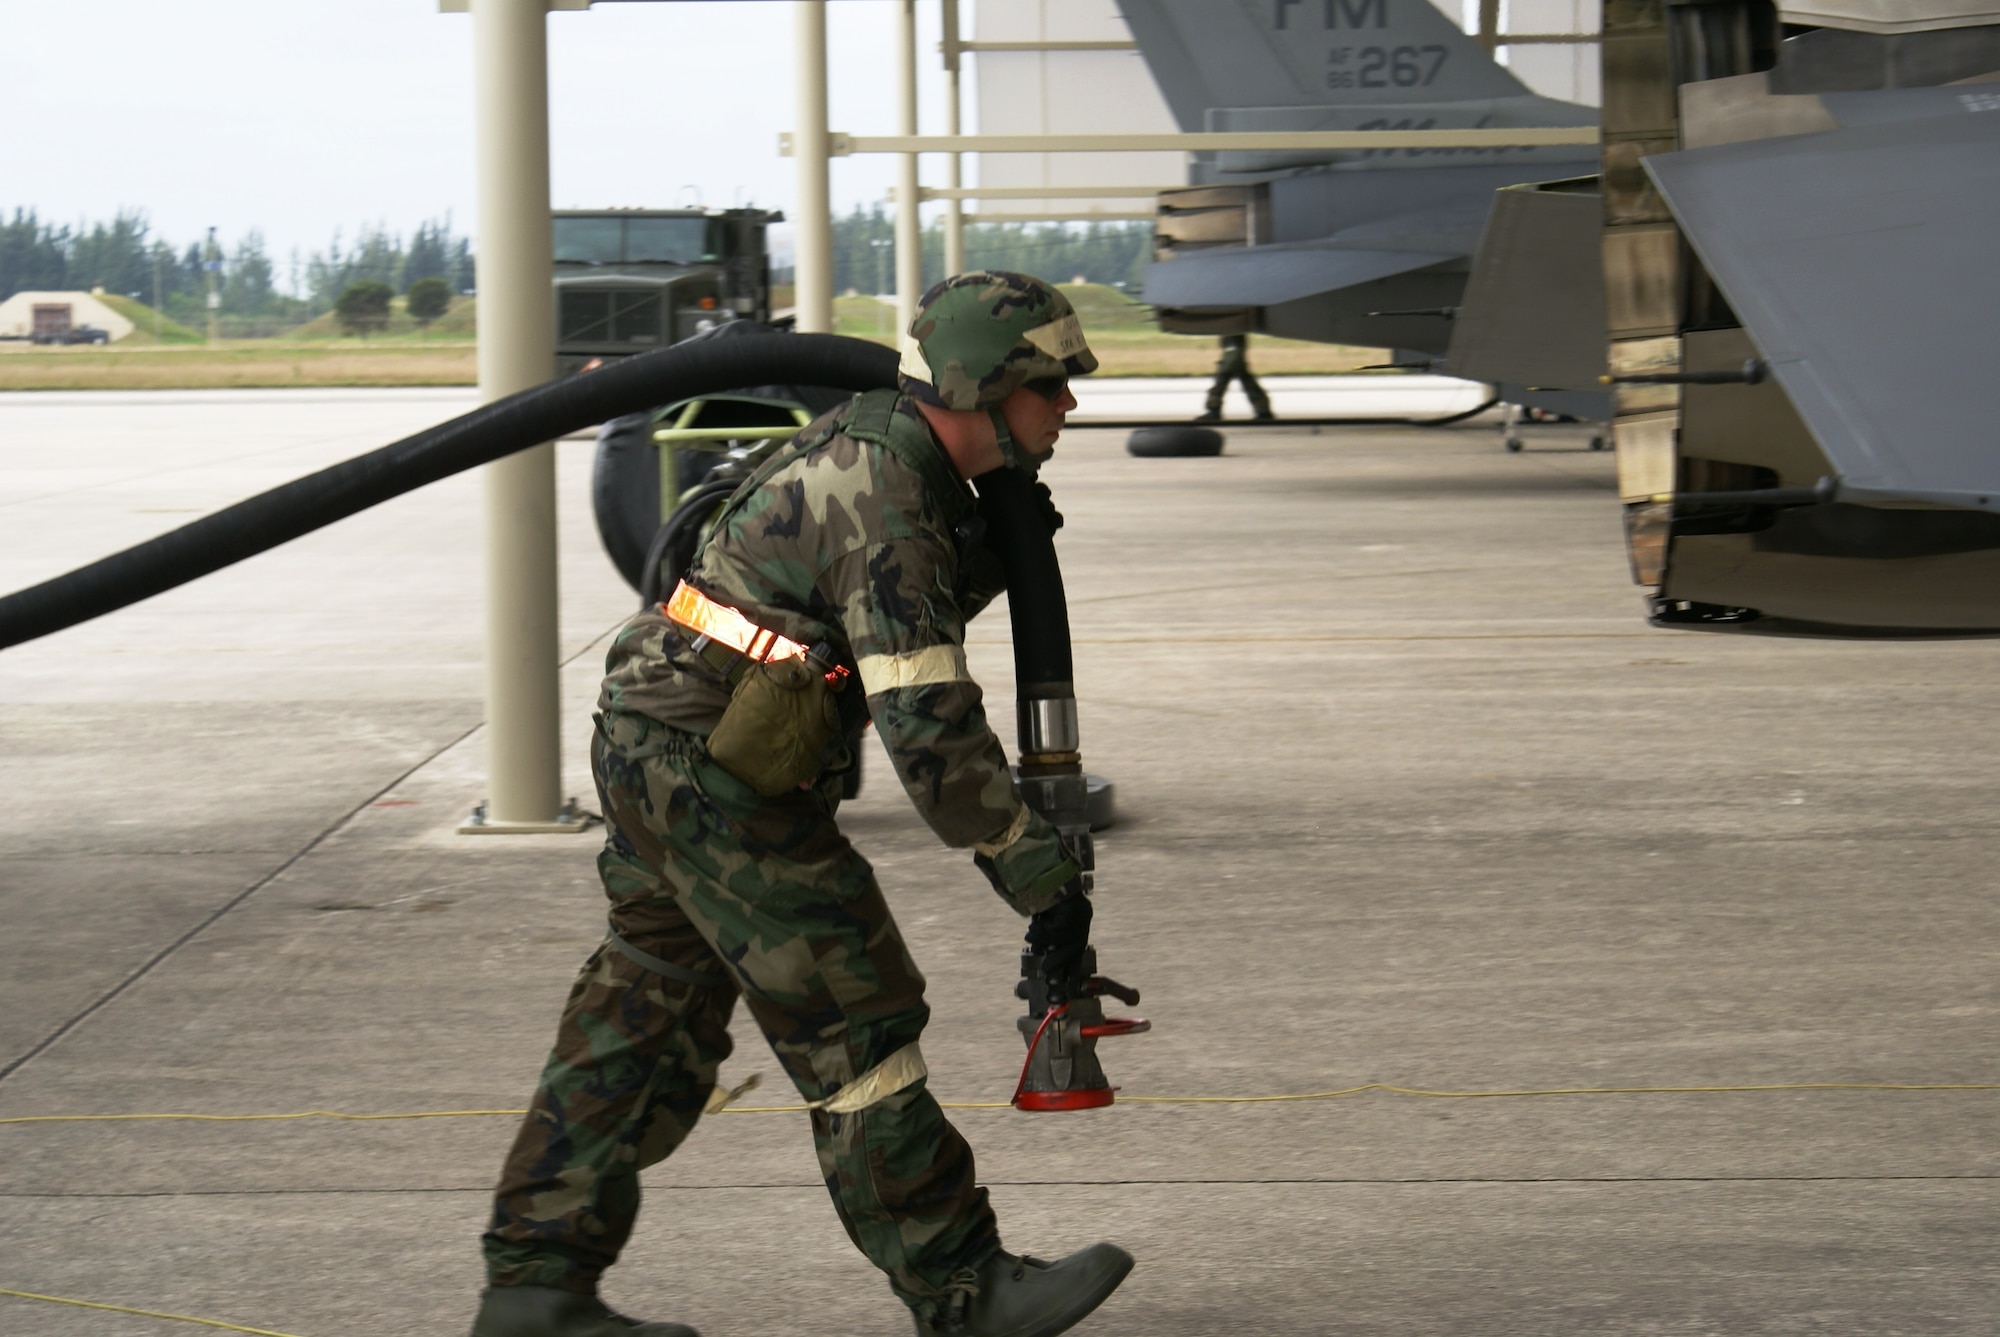 Senior Airman William Kuykendall, 482nd Logistics Readiness Squadron, prepares to refuel an F-16 after returning from a training mission during Operation Deliberate Tropic, Homestead Air Reserve Base, March 10, 2008.  The Operational Readiness Exercise is a self-assessment of the wing’s ability to perform in a simulated combat environment. Explosive devices, smoke grenades and sirens will be used during the exercise to create realistic scenarios that reservists will encounter during the exercise. “Homestead Air Reserve Base goes to great lengths to ensure safety procedures are established and followed during exercises to prepare our reservists for deployment,” said Mr. Sean Quinn, 482nd Mission Support Group Emergency Management Office. (U.S. Air Force photo/Tim Norton)
